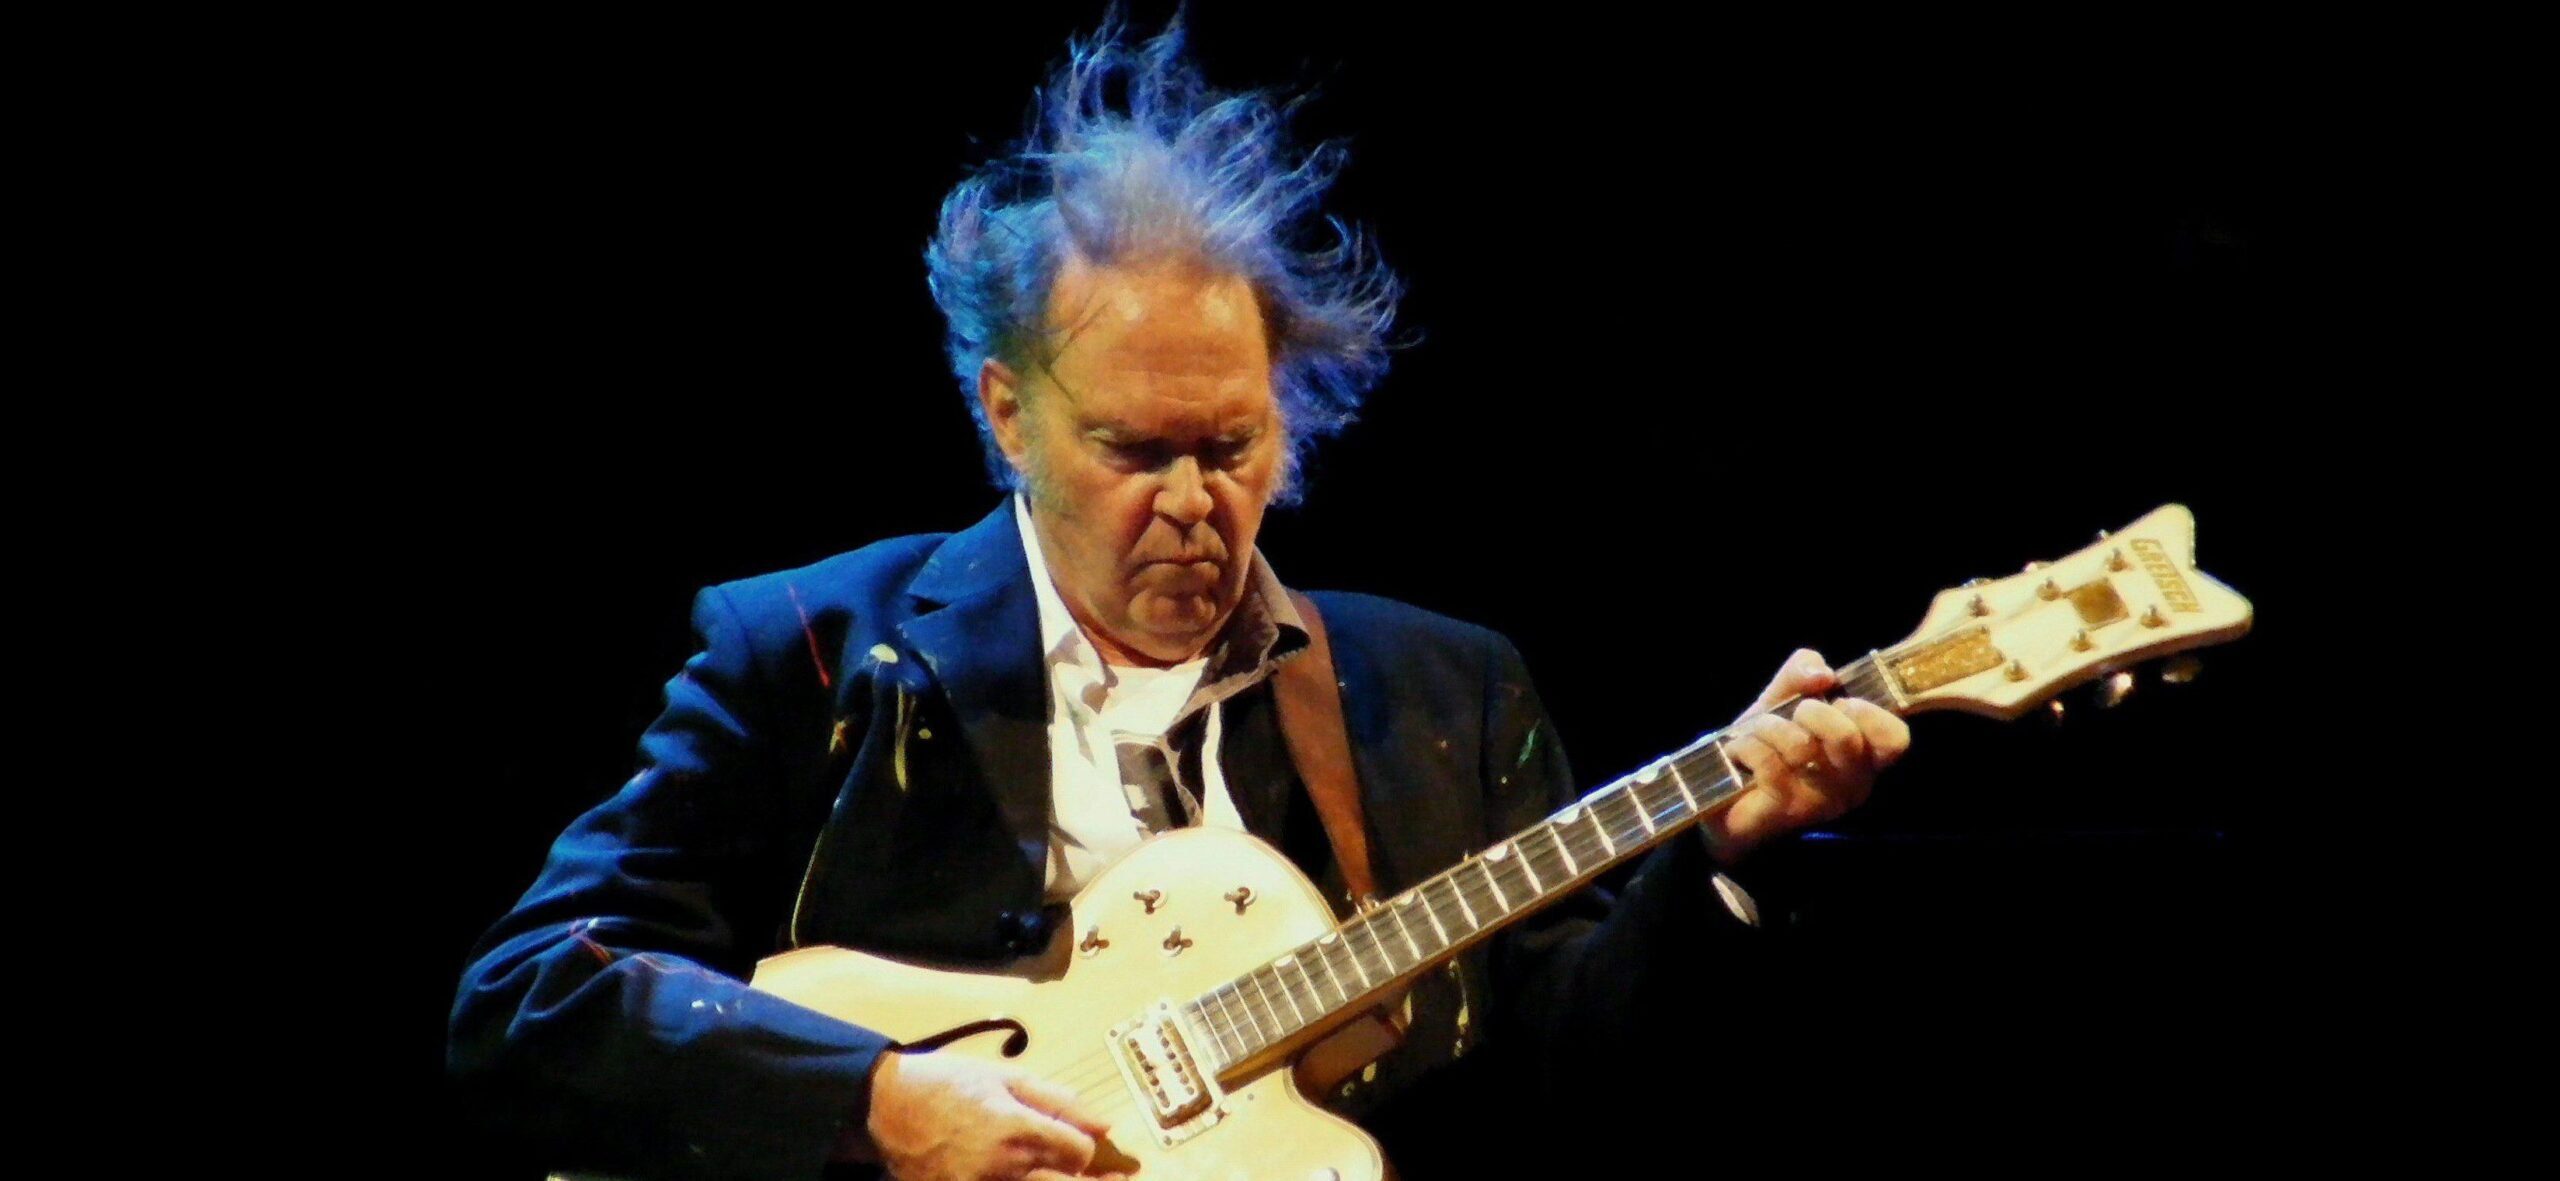 Neil Young Returns to Spotify, Swallowing His Anti-Rogan Pride